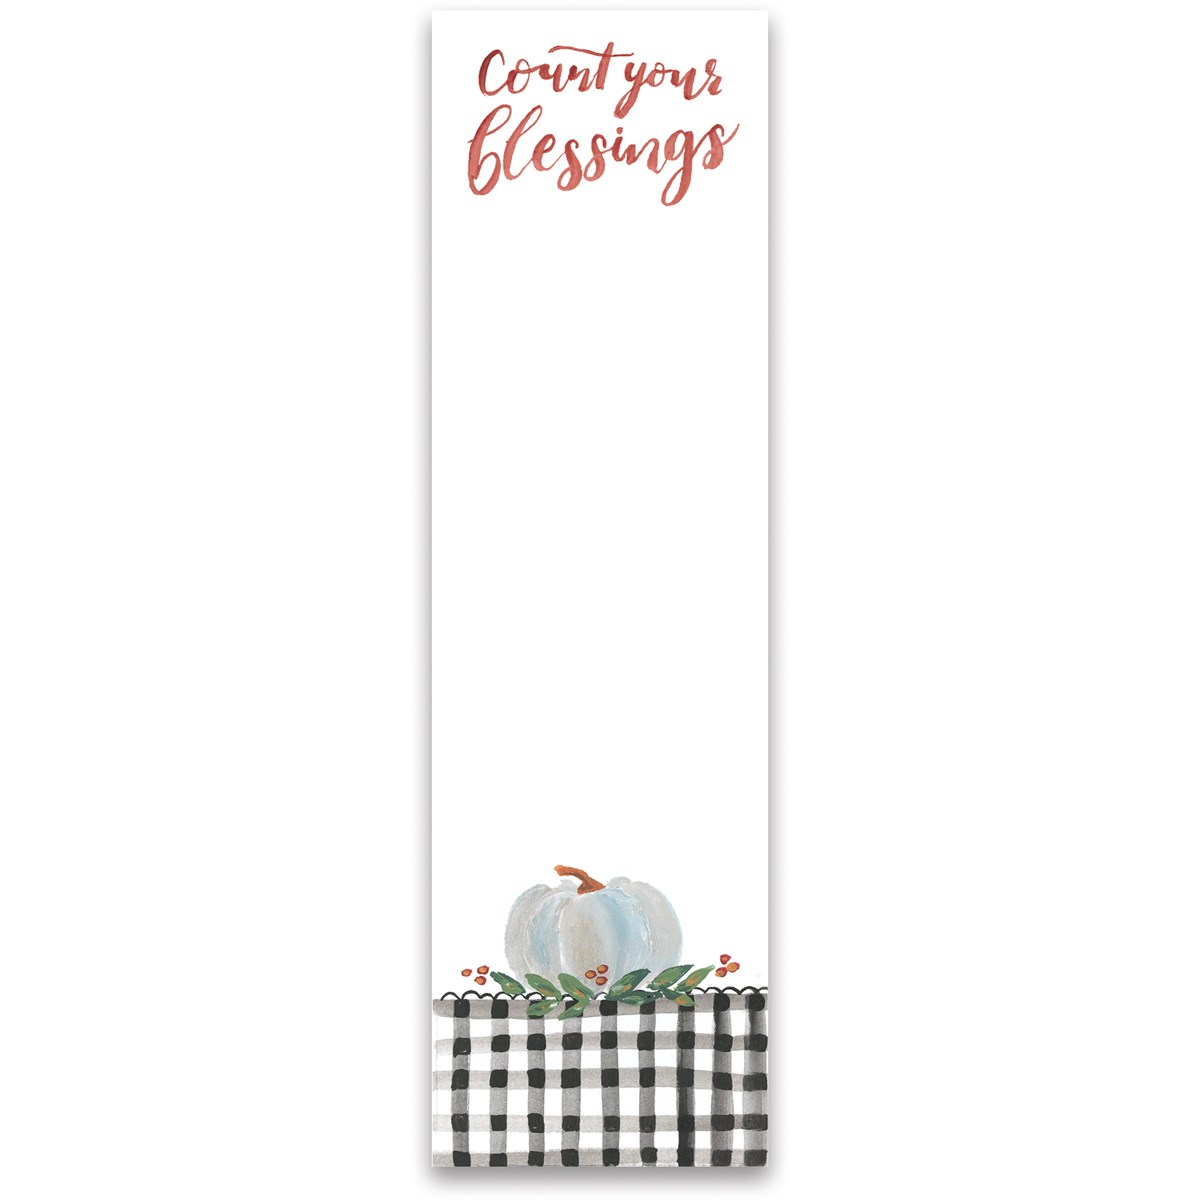 Count Your Blessings Framed Canvas Banner 